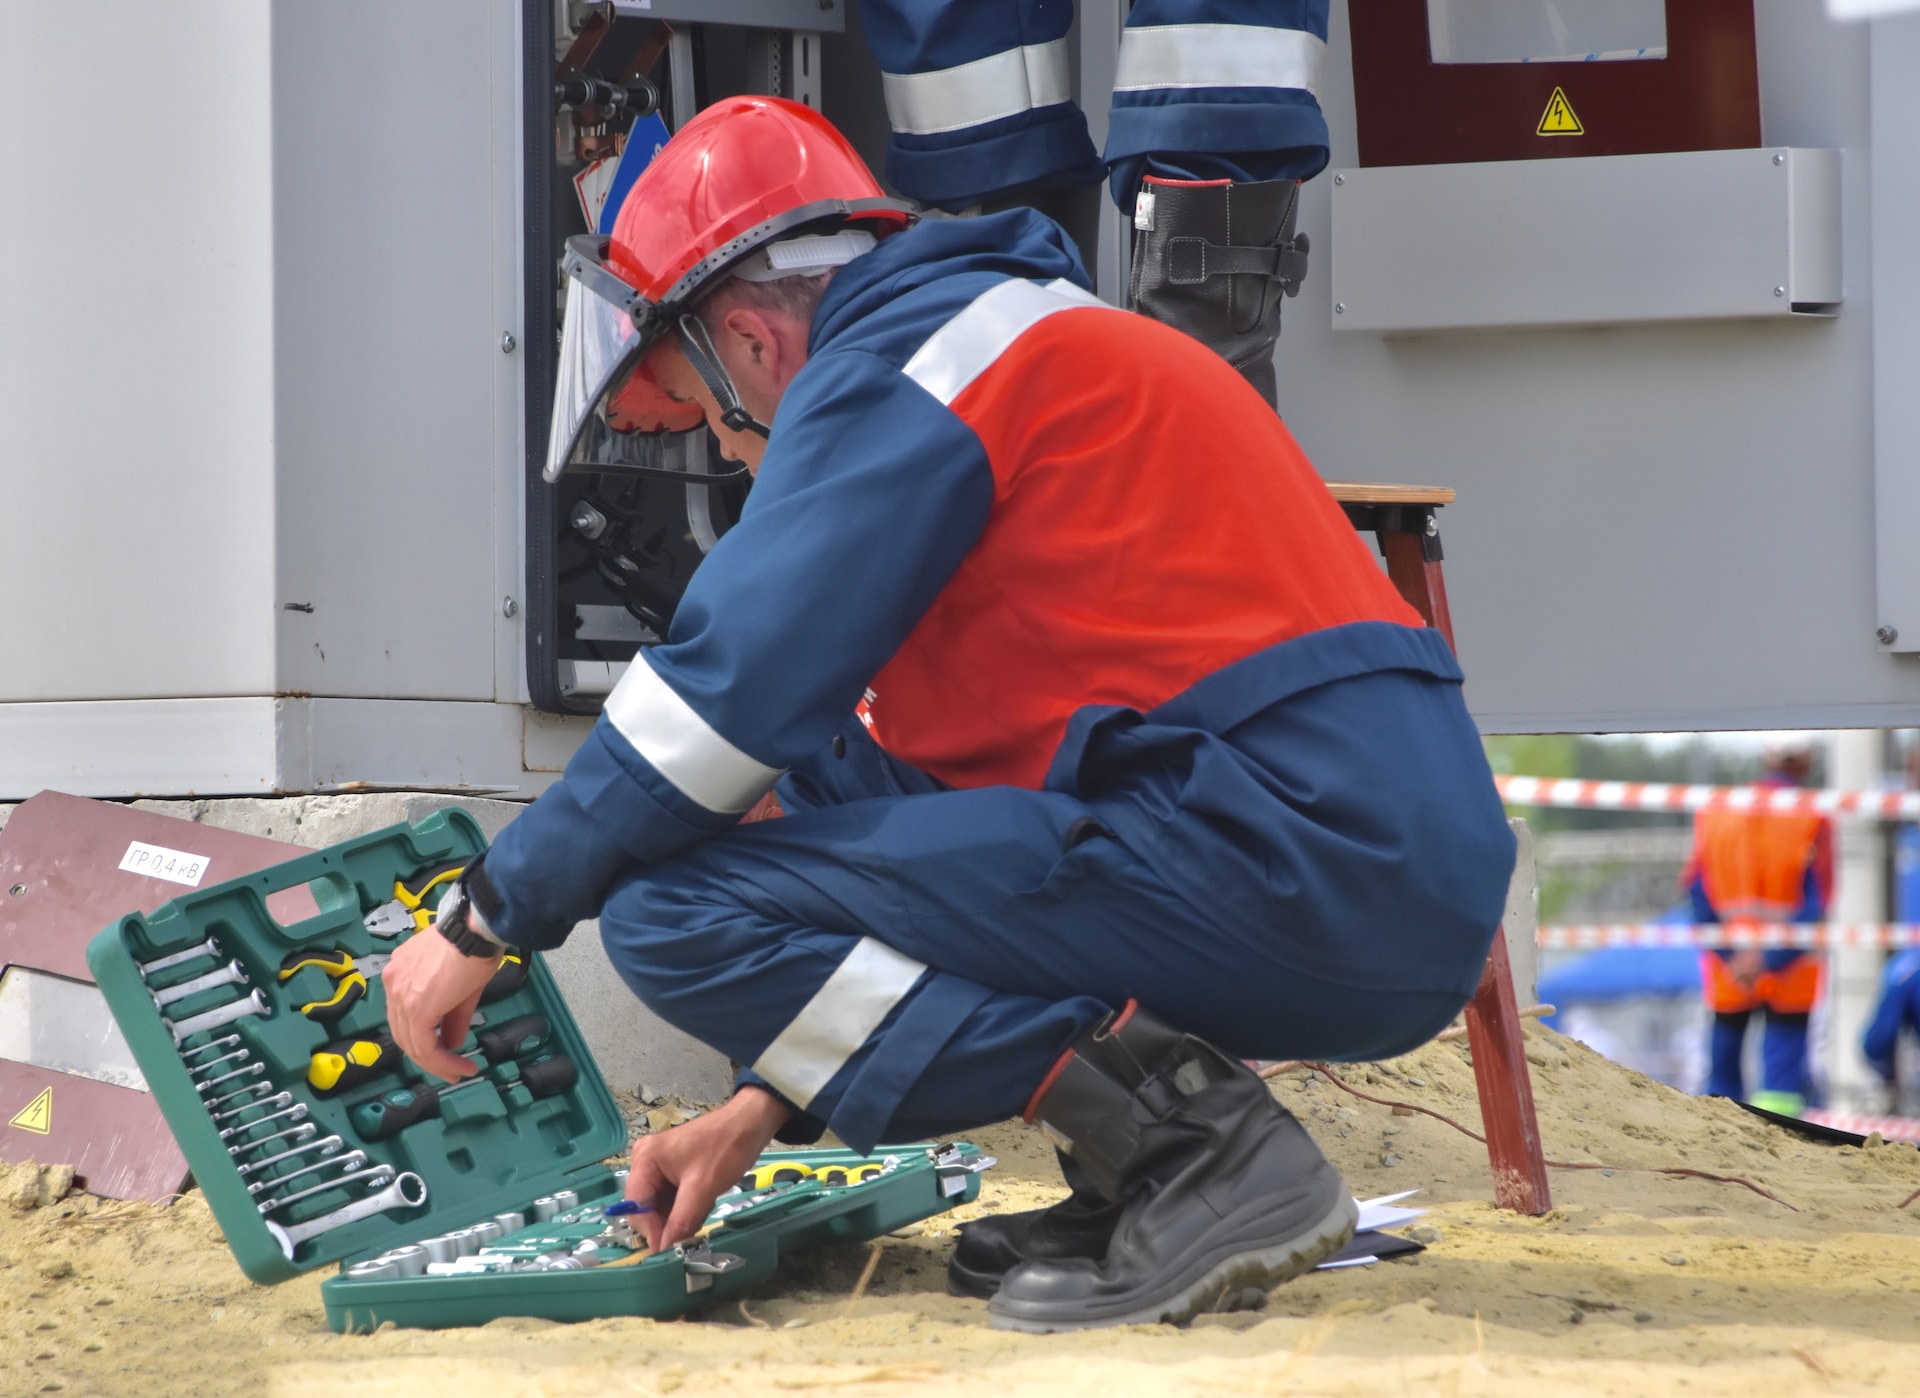 Man opening a tool kit on the ground in safety gear